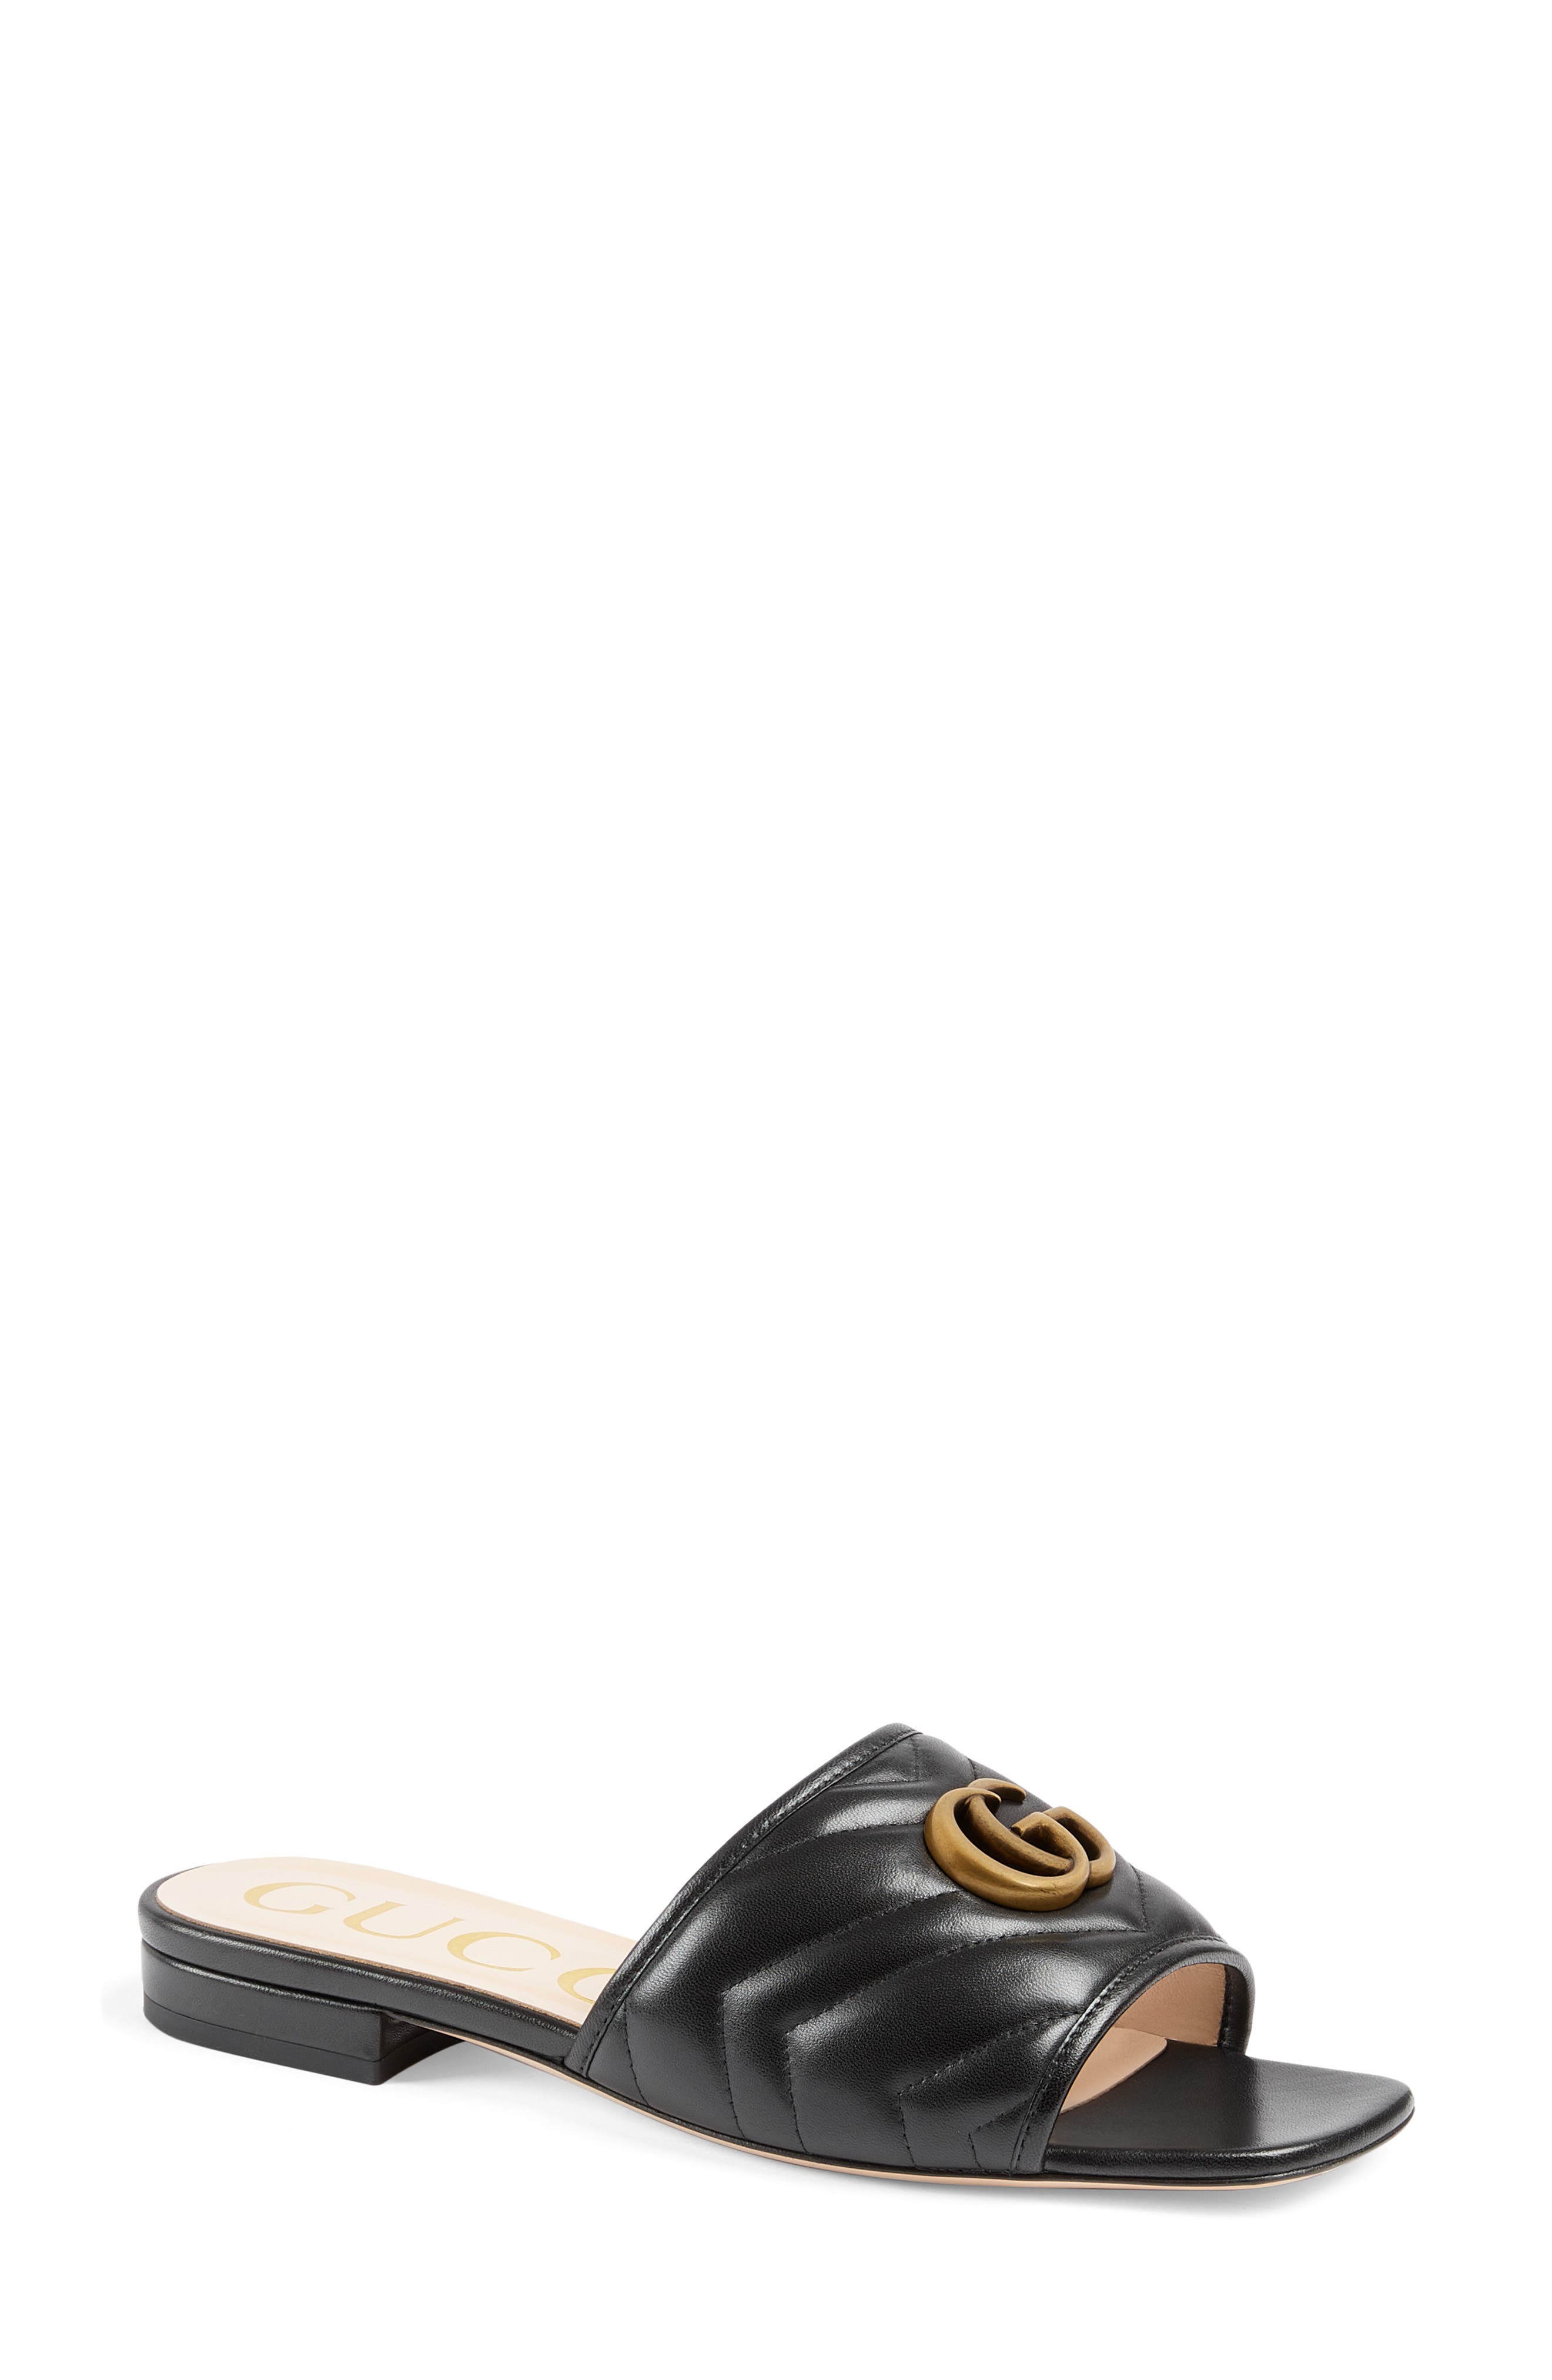 nordstrom gucci womens shoes